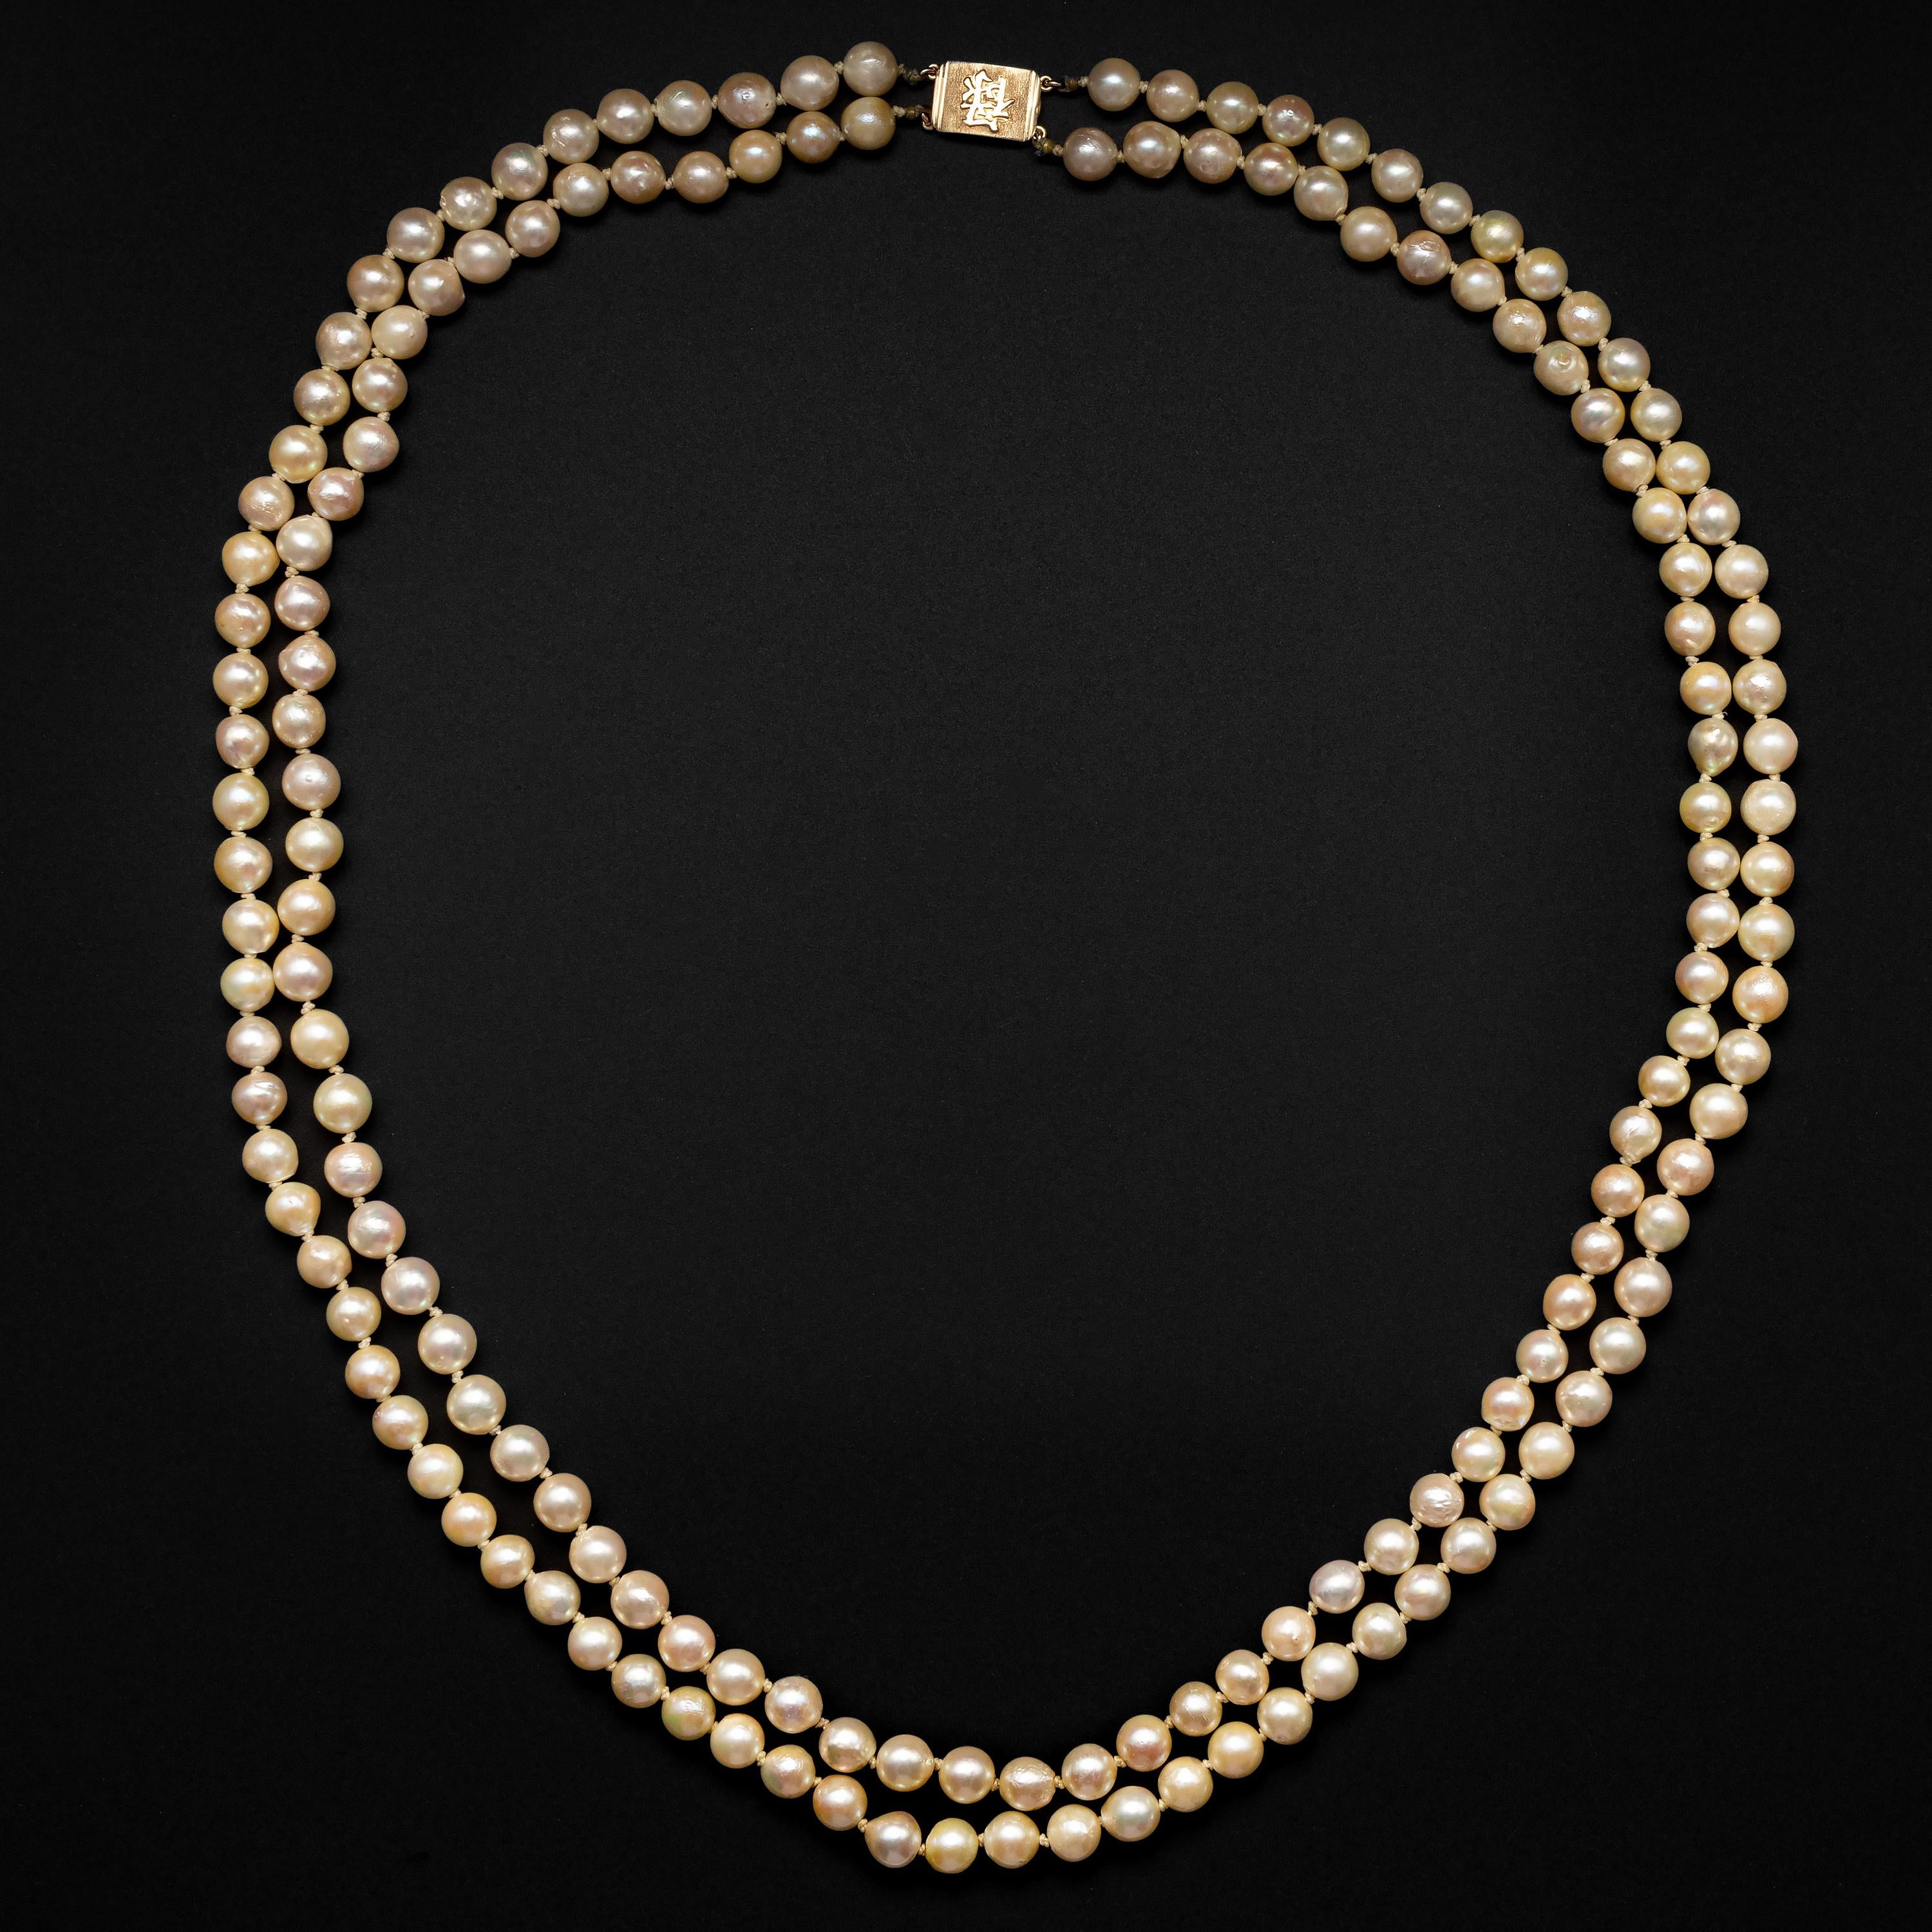 Dating from the late 1950s, this double-strand cultured Akoya pearl necklace was created by the iconic Hawaii-based jeweler, Ming's. The firm was known their their unique aesthetic and use of high-quality materials including natural, untreated